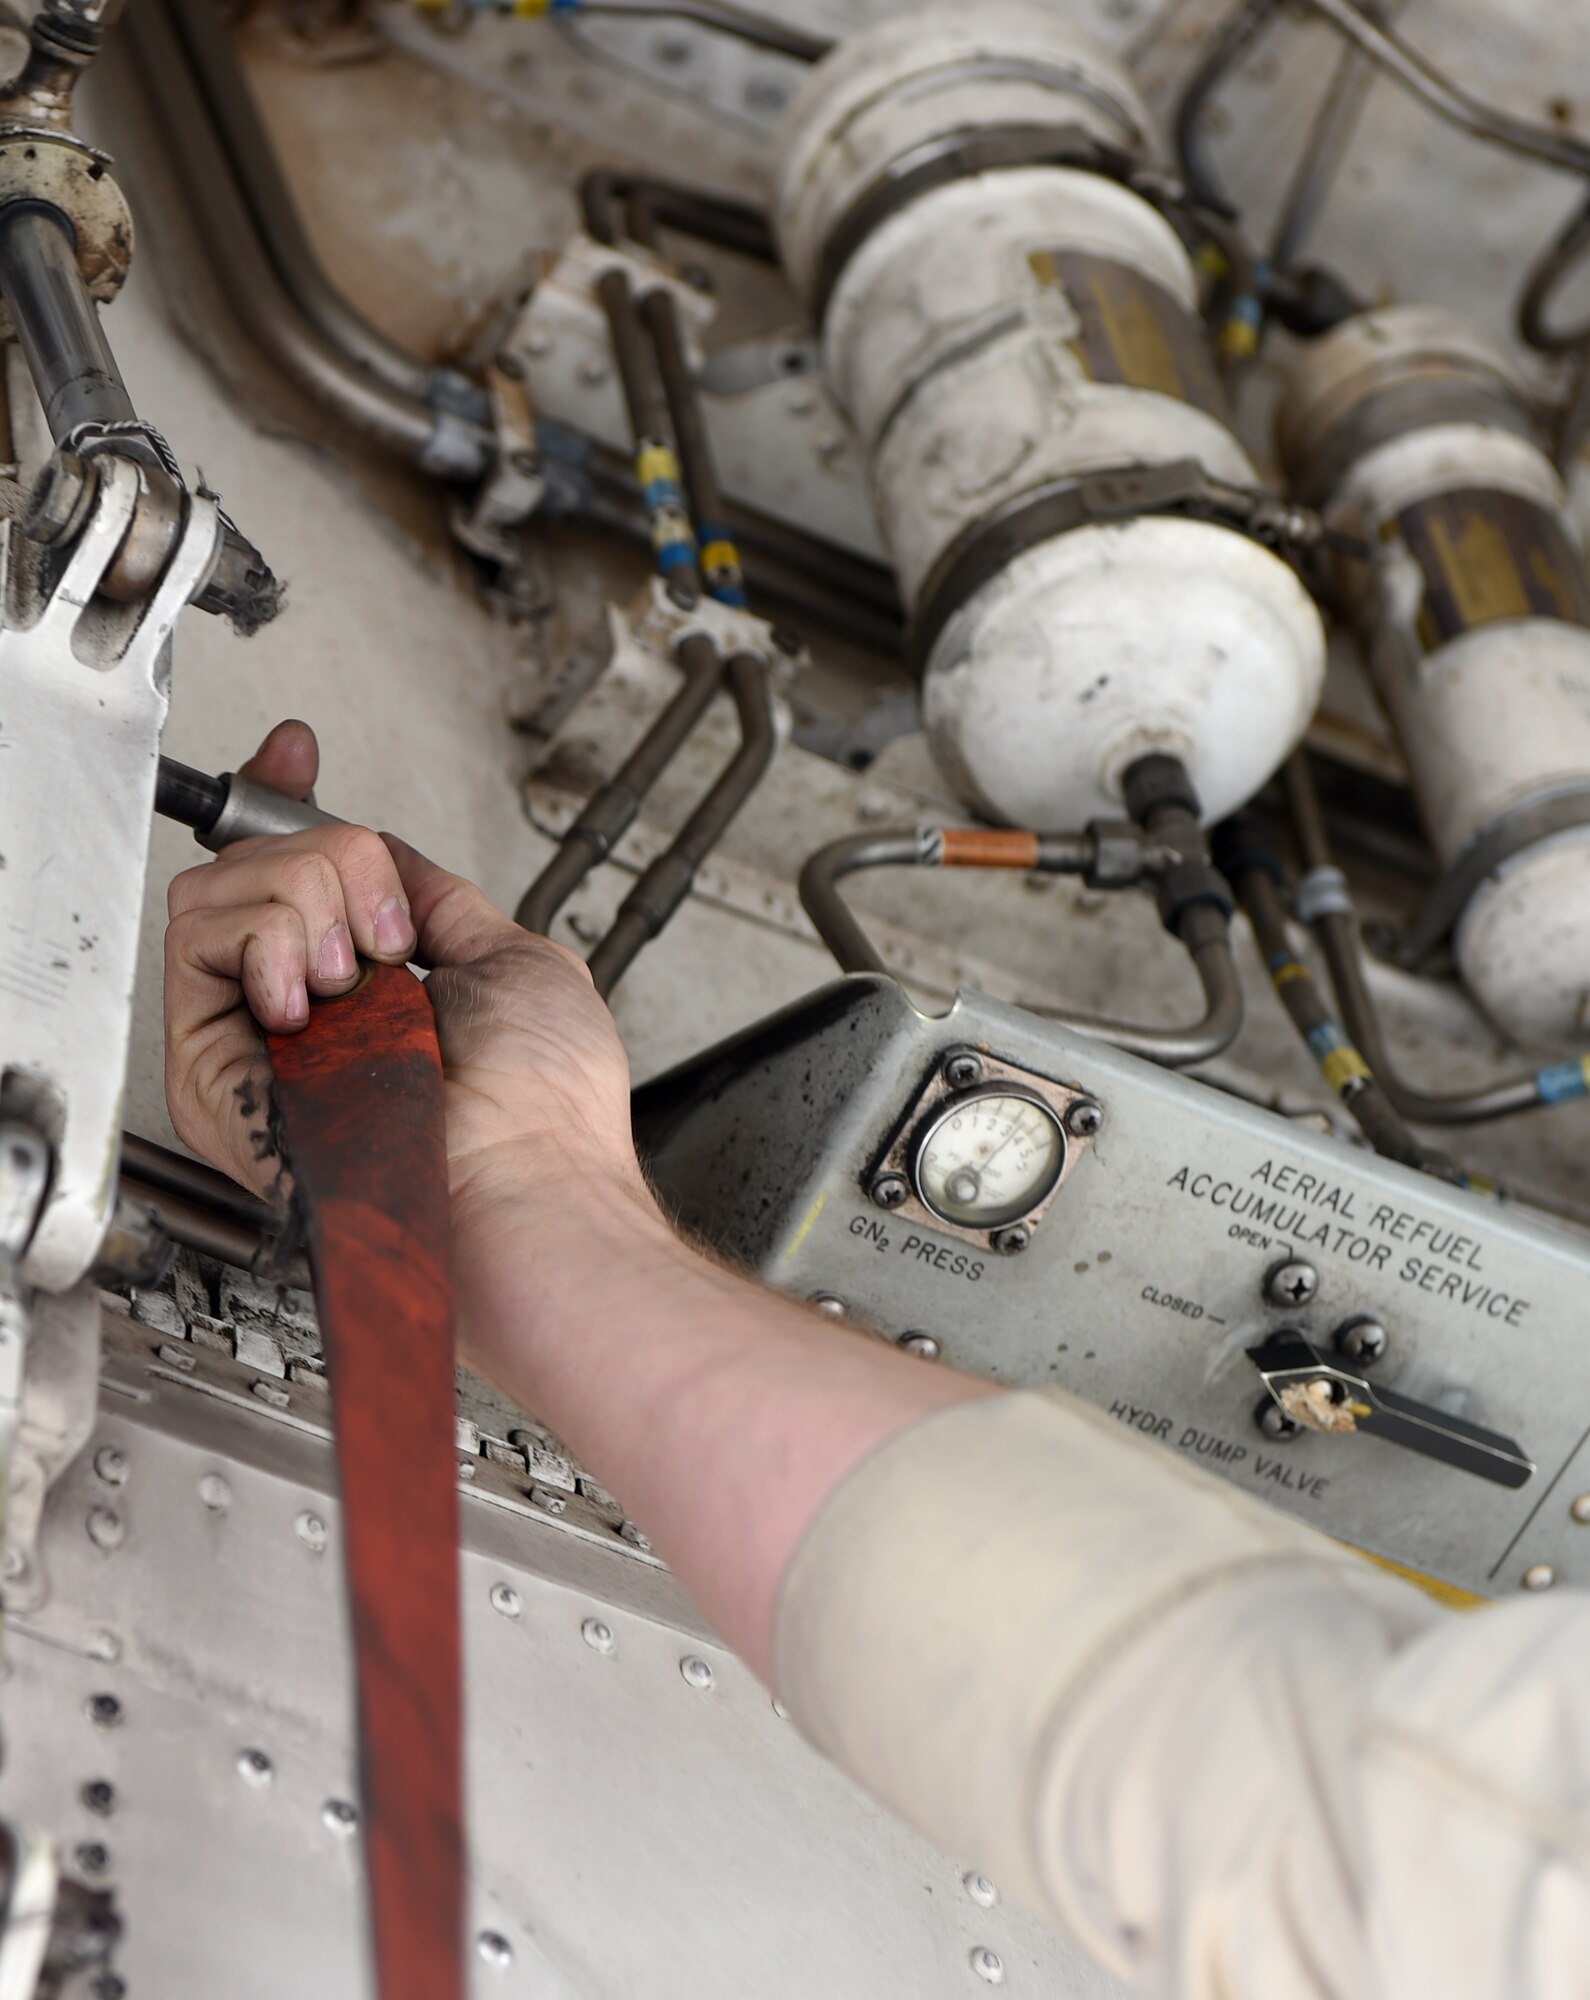 U.S. Air Force Senior Airman Jason Stach, 28th Aircraft Maintenance Unit B-1 aircraft technician, places a safety pin in place to keep the front landing gear doors from closing during maintenance on a B-1B Lancer May 3, 2016, at Dyess Air Force Base, Texas. In order to become a B-1 aircraft technician, Stach had to go through a four-month technical school. Two months of that school consisted of basic aircraft maintenance and terminology and the remainder was hands-on training here at Dyess. (U.S. Air Force photo by Senior Airman Alexander Guerrero/Released)